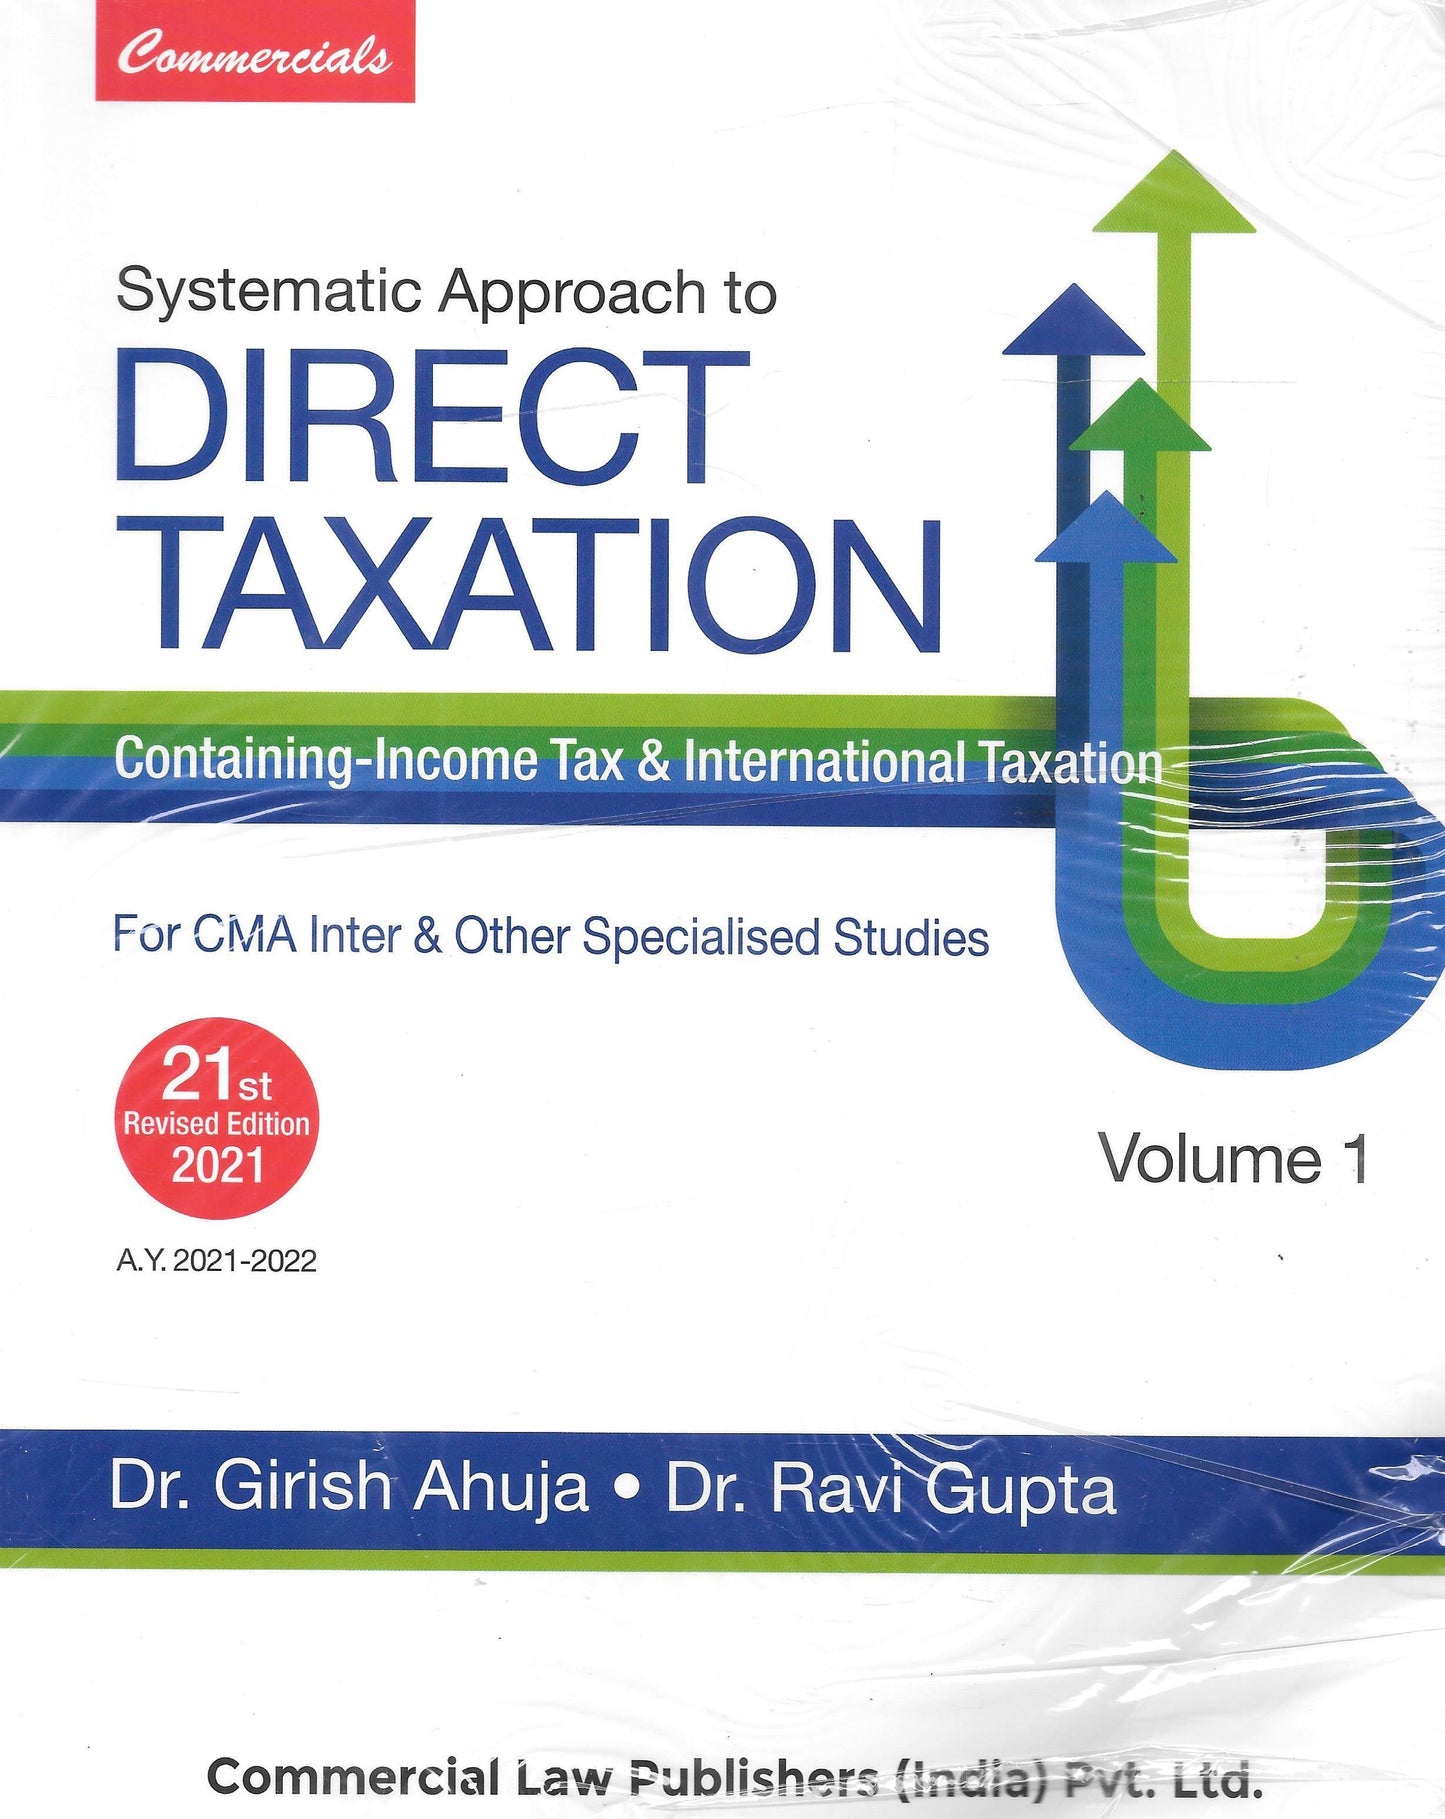 Systematic Approach To Direct Taxation